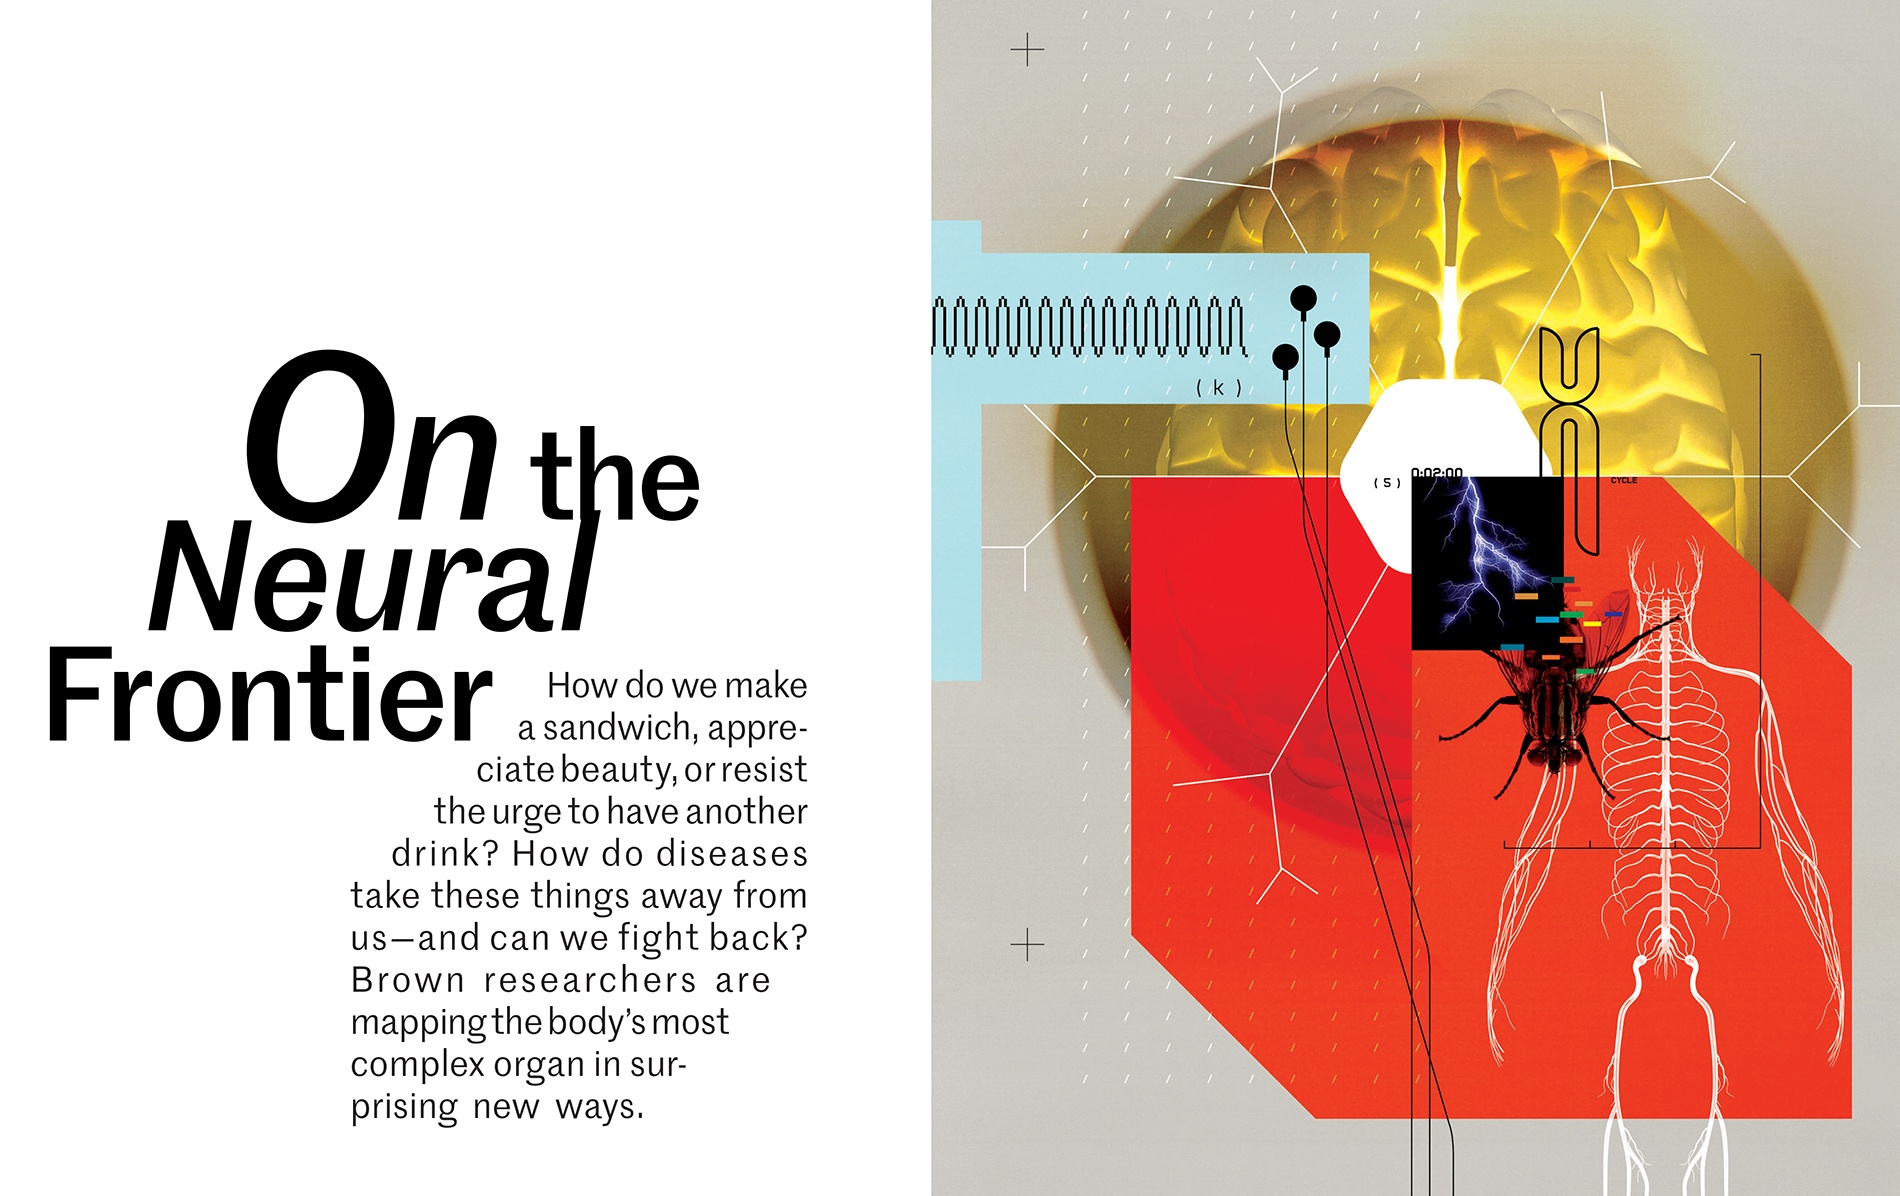 Brain science illo showing a brain, nervous system, dna marker, and a fly